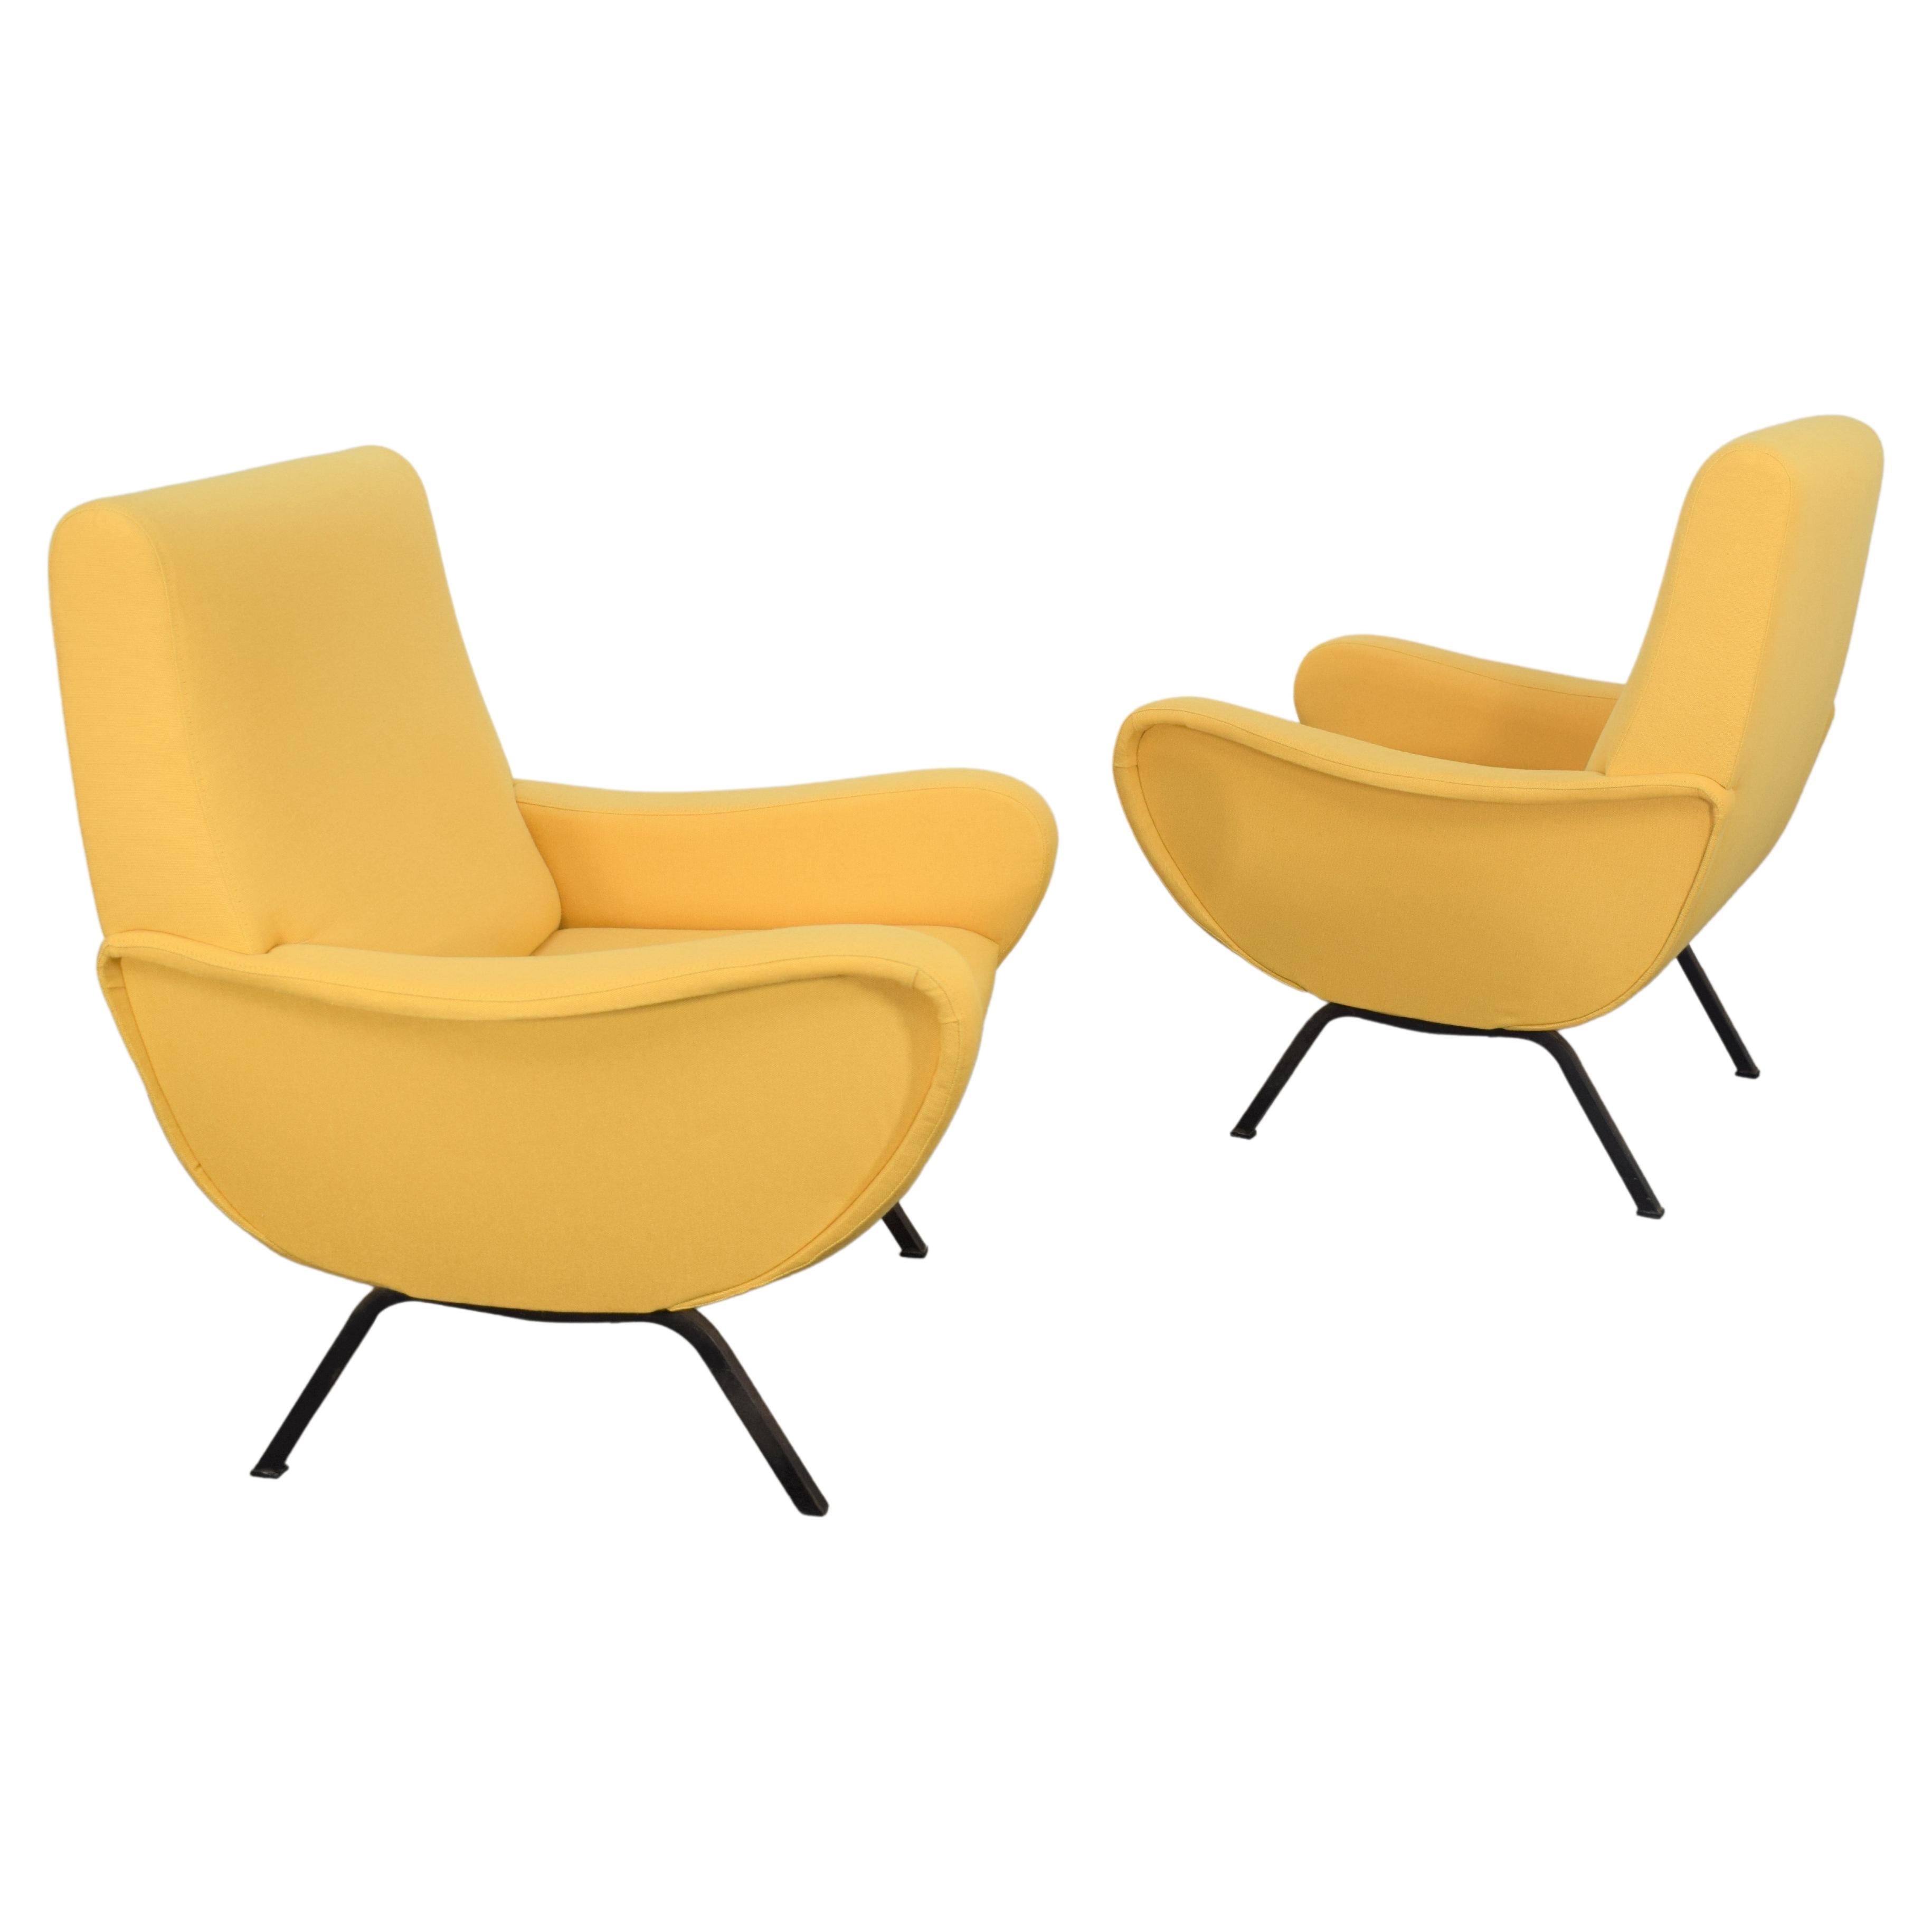 Pair of Italian Armchairs Marco Zanuso Style, 1960s For Sale